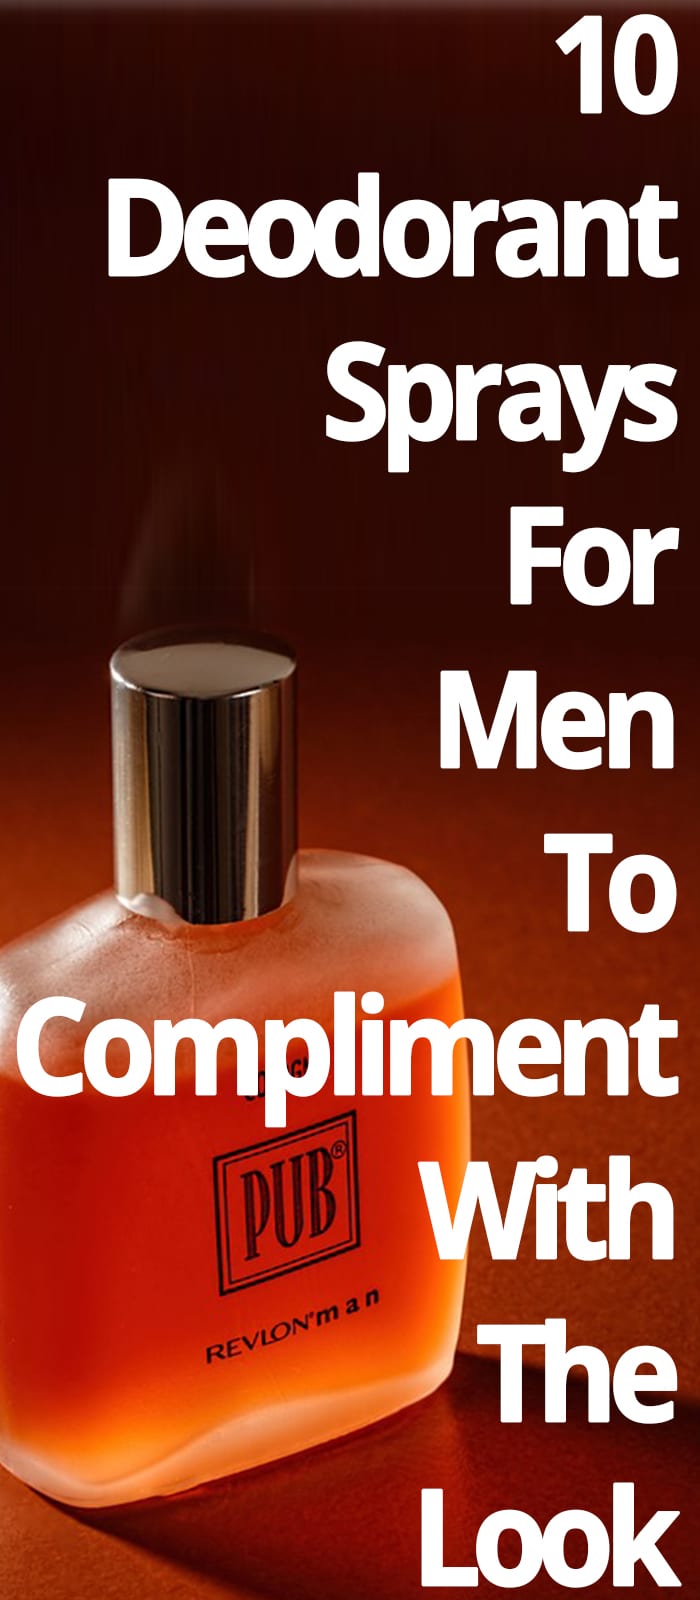 DEODORANT SPRAYS FOR MEN TO COMPLIMENT WITH THE LOOK